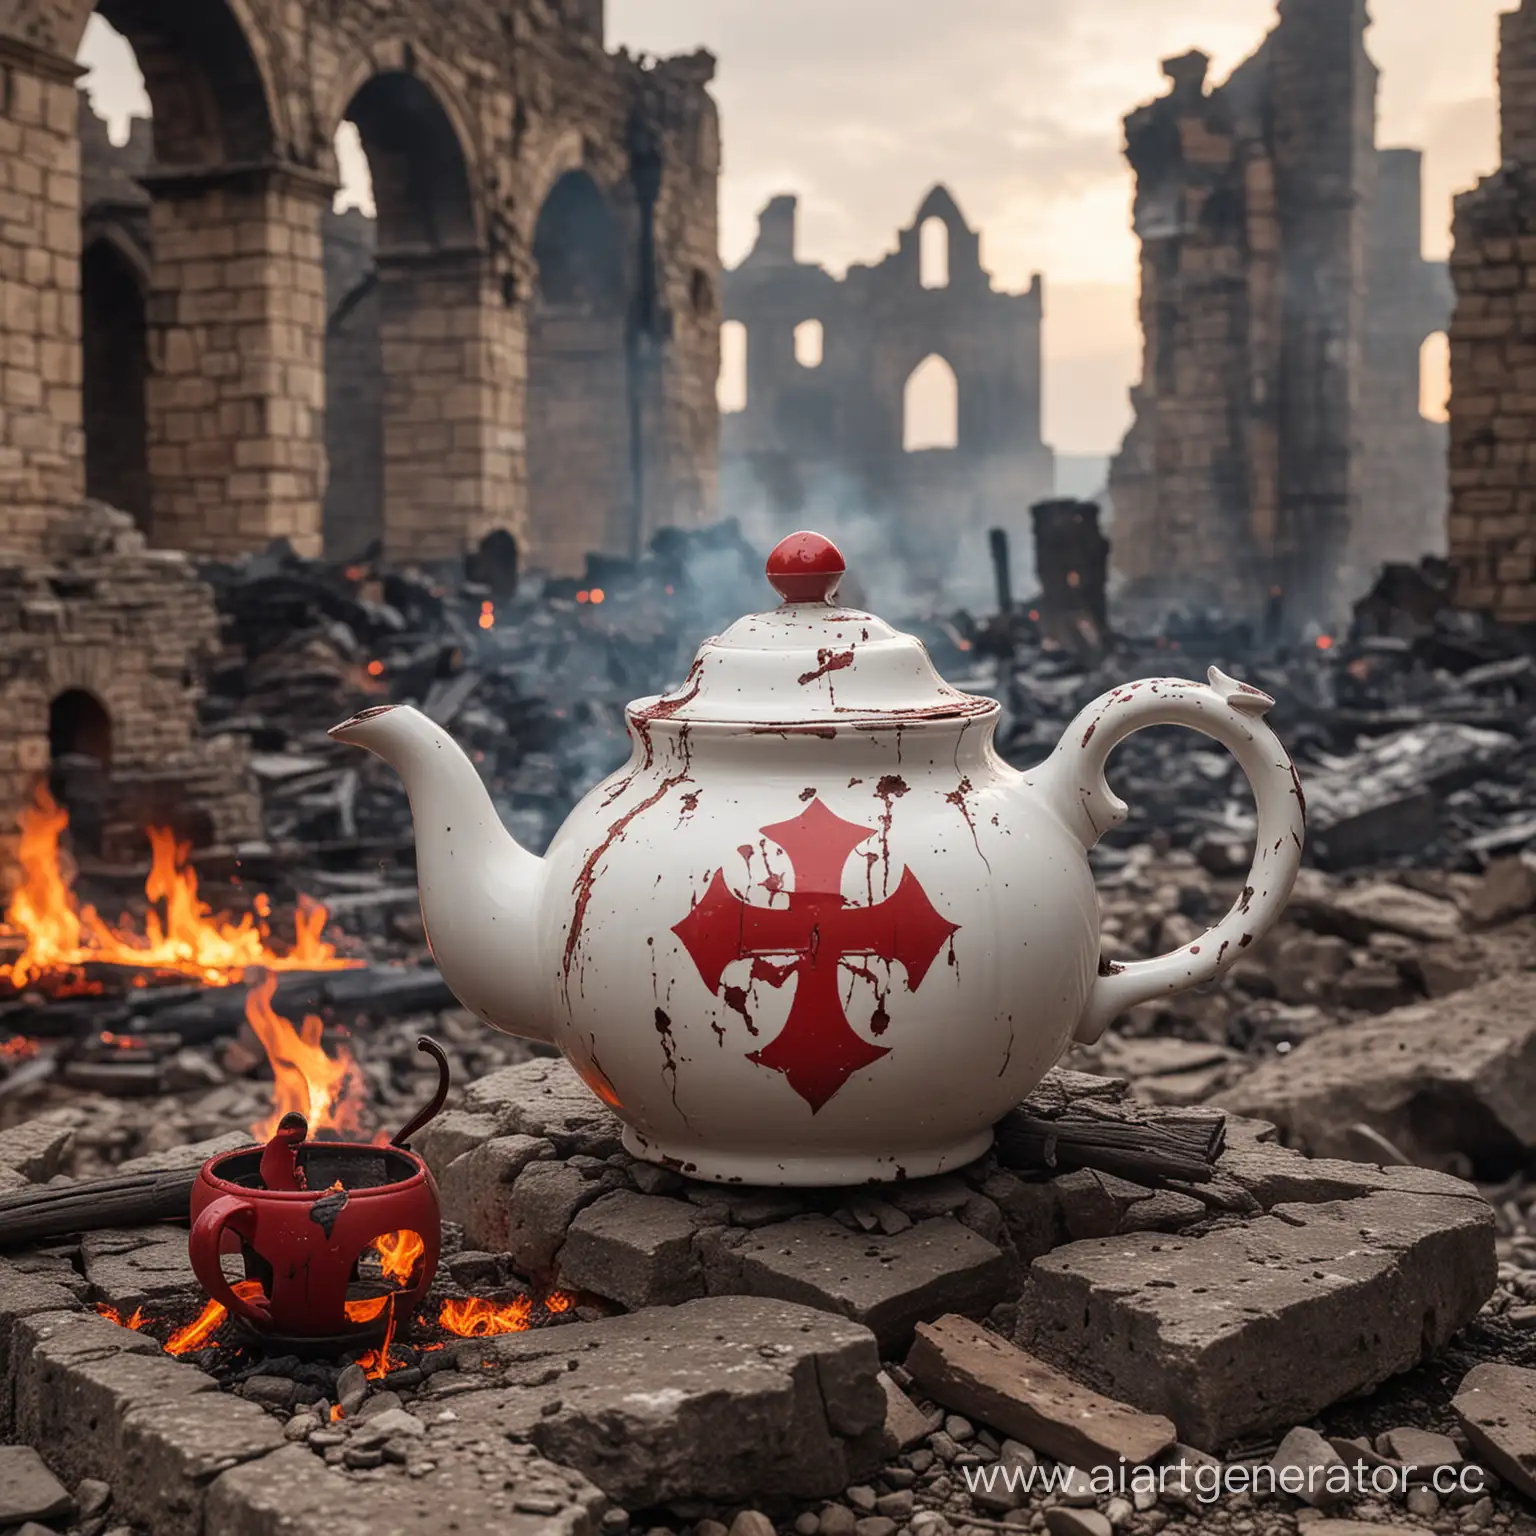 Ruined-Castle-Scene-with-Red-Templar-Emblem-Teapot